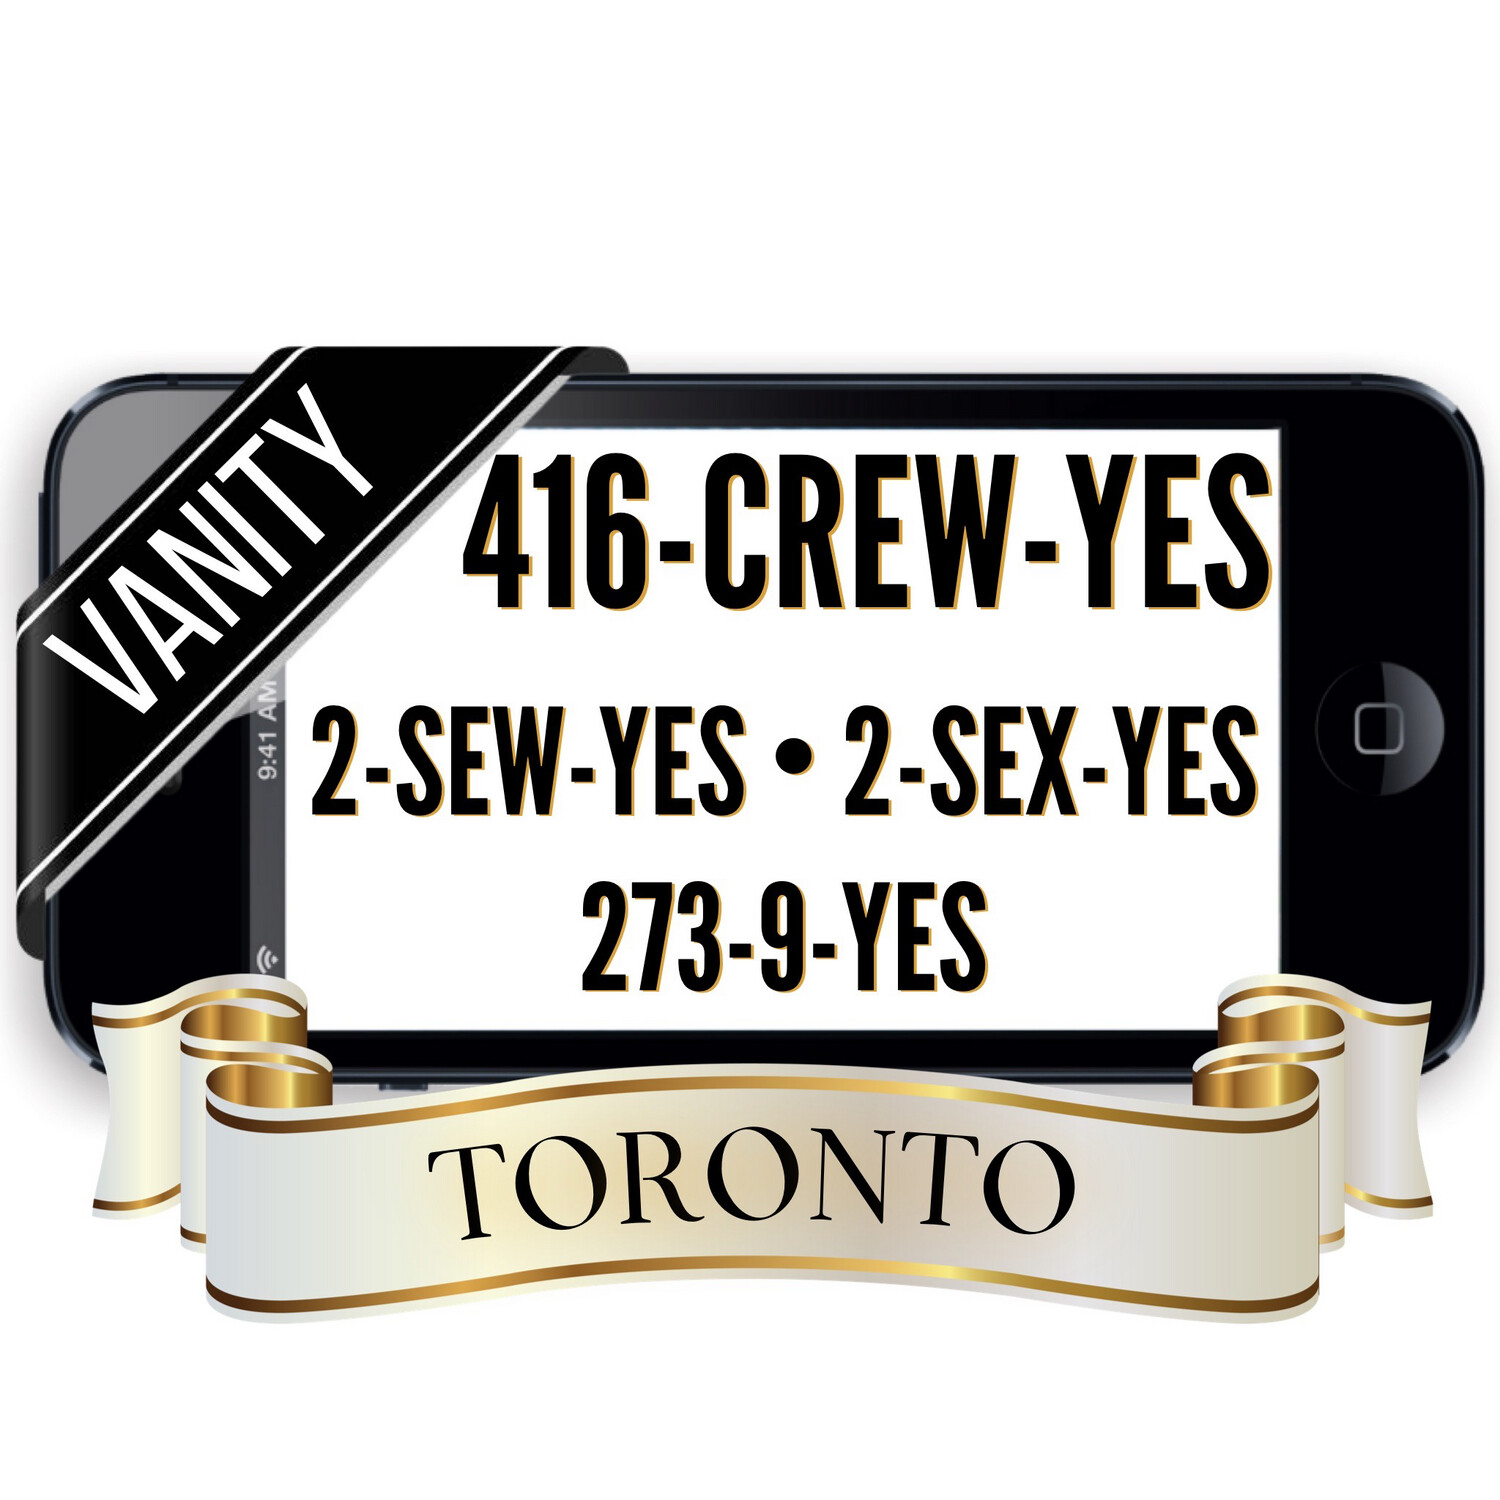 416-273-9937 (CREW YES, SEX-YES, SEW-YES)